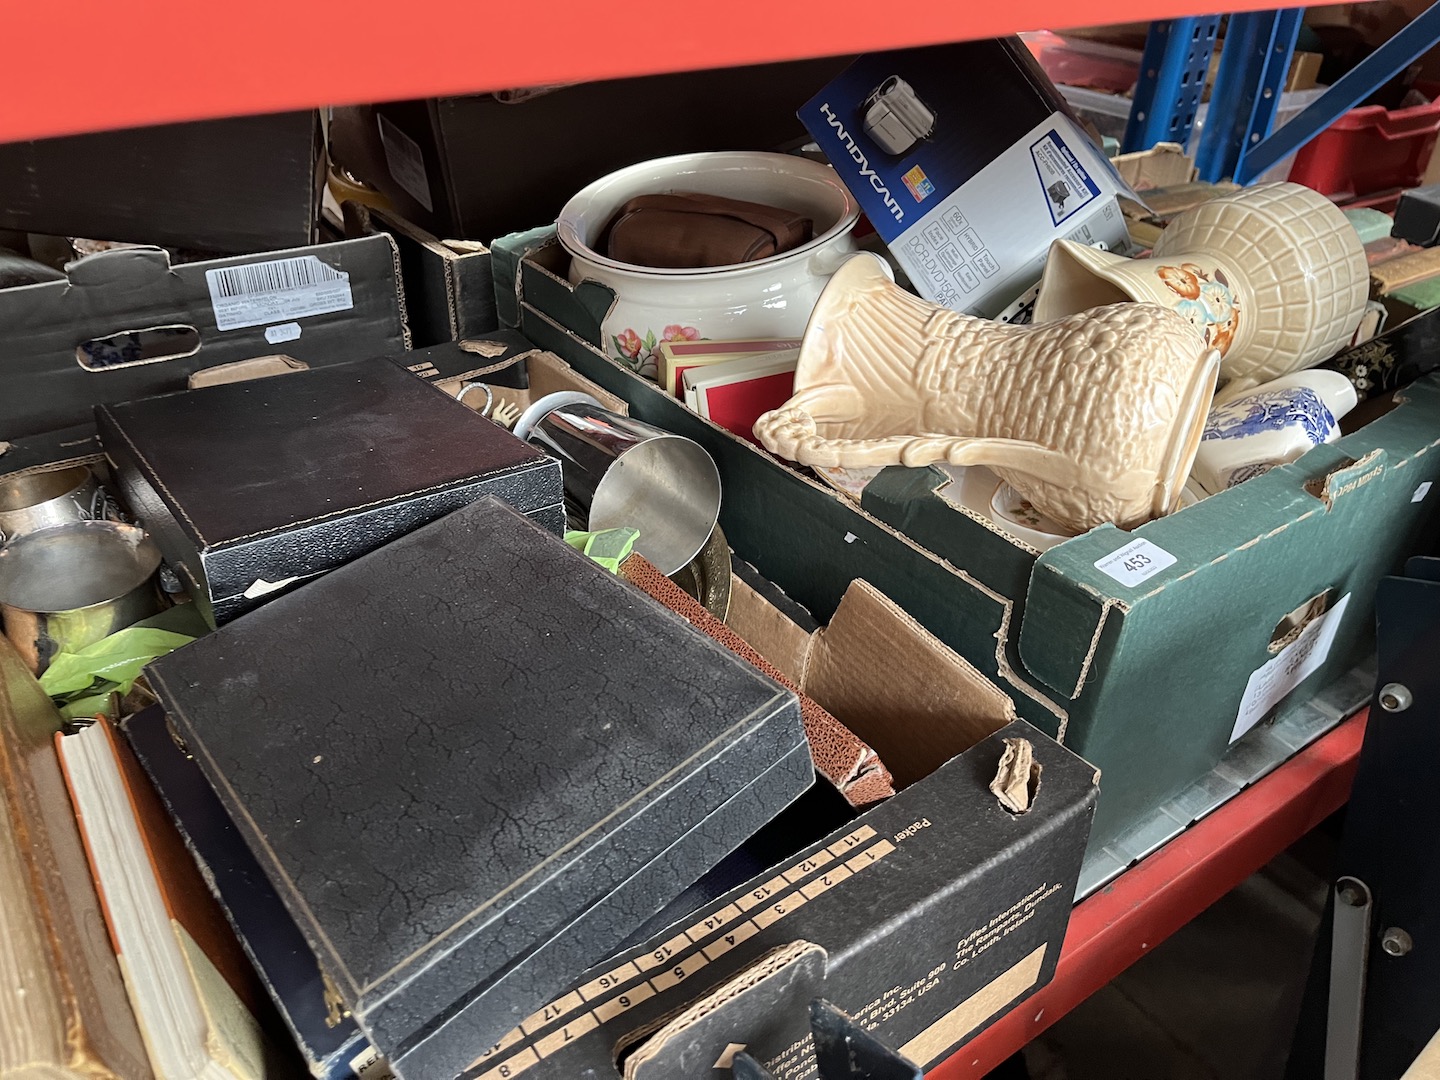 A box of ceramics and a box of plated ware, brassware and cutlery etc